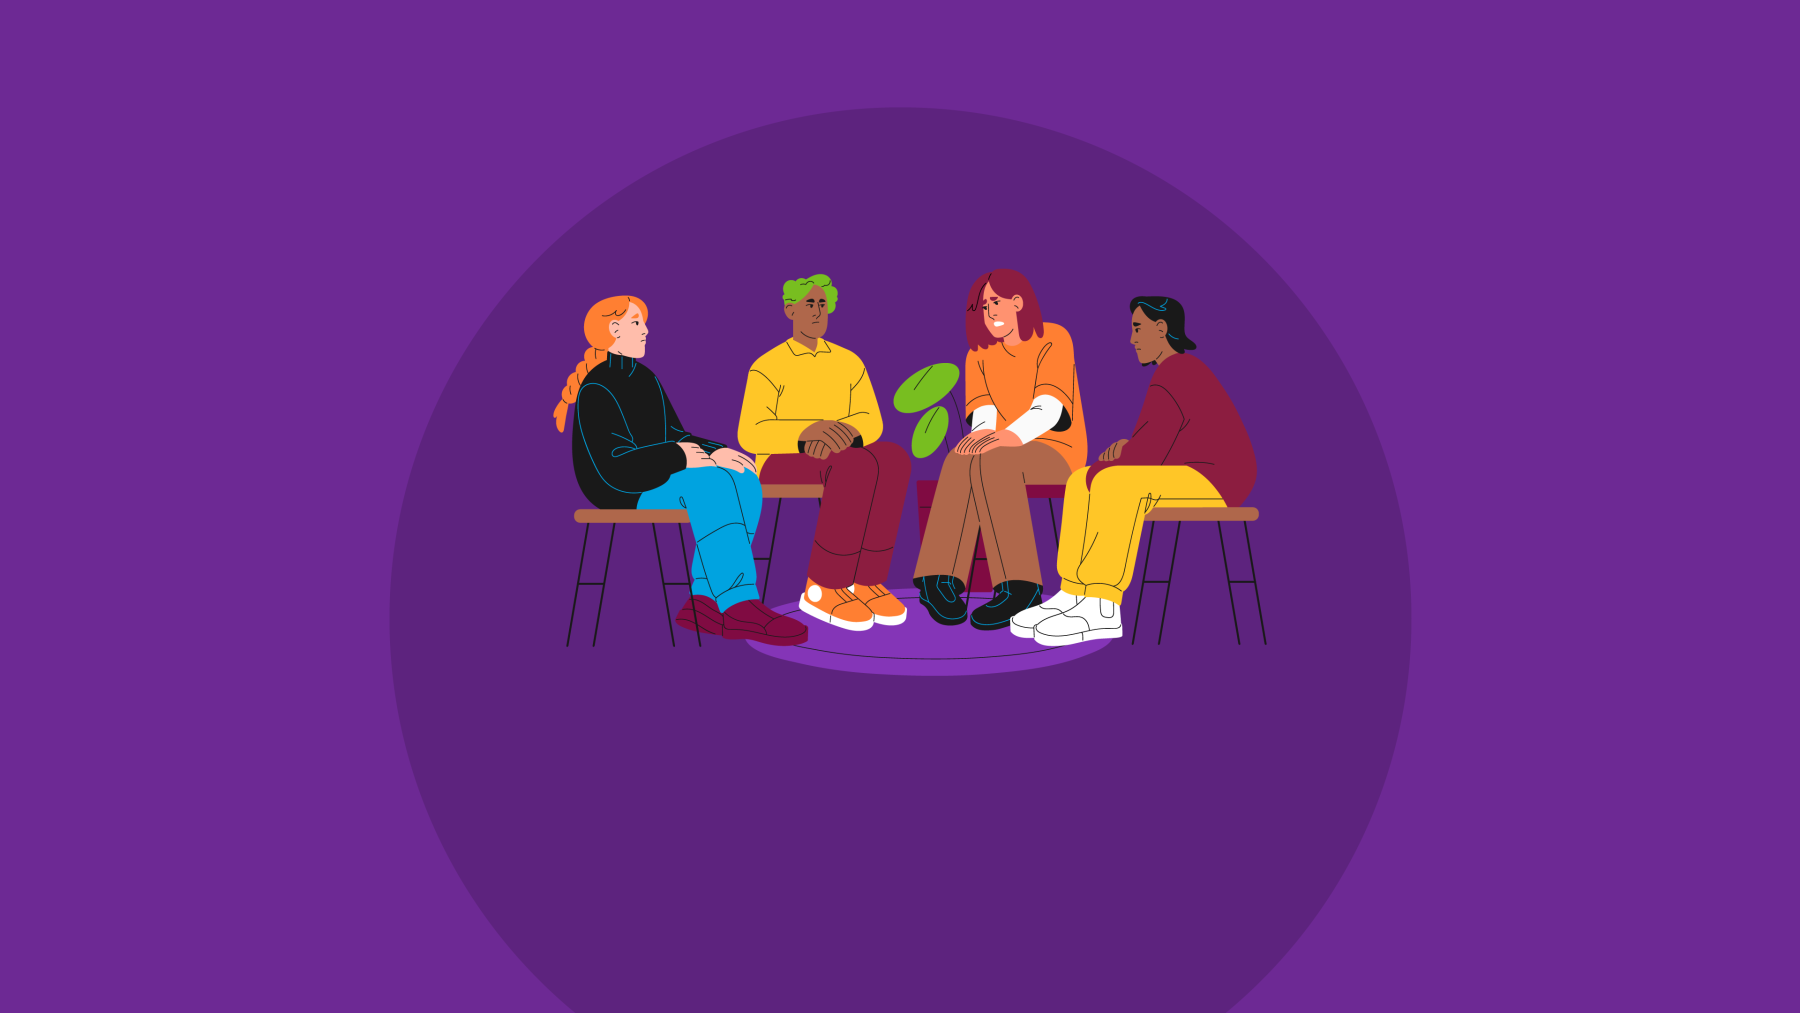 An illustration of four friends sitting together